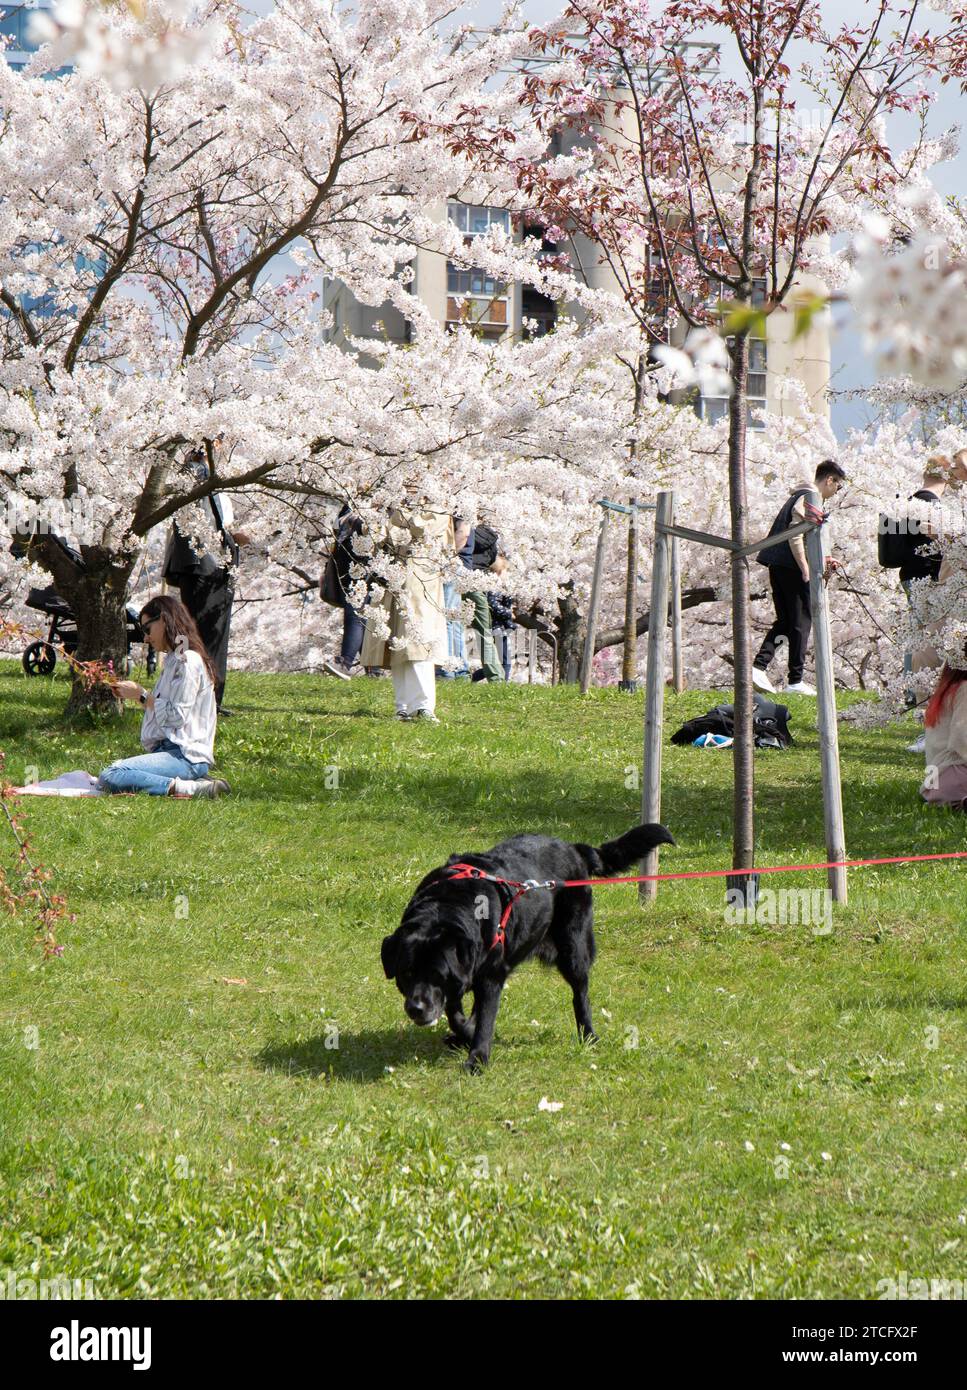 dog walking, pet, person, active lifestyle, friends, relaxation, lifestyle, park, cherry tree, walking, photography, healthy lifestyle, weekend activi Stock Photo